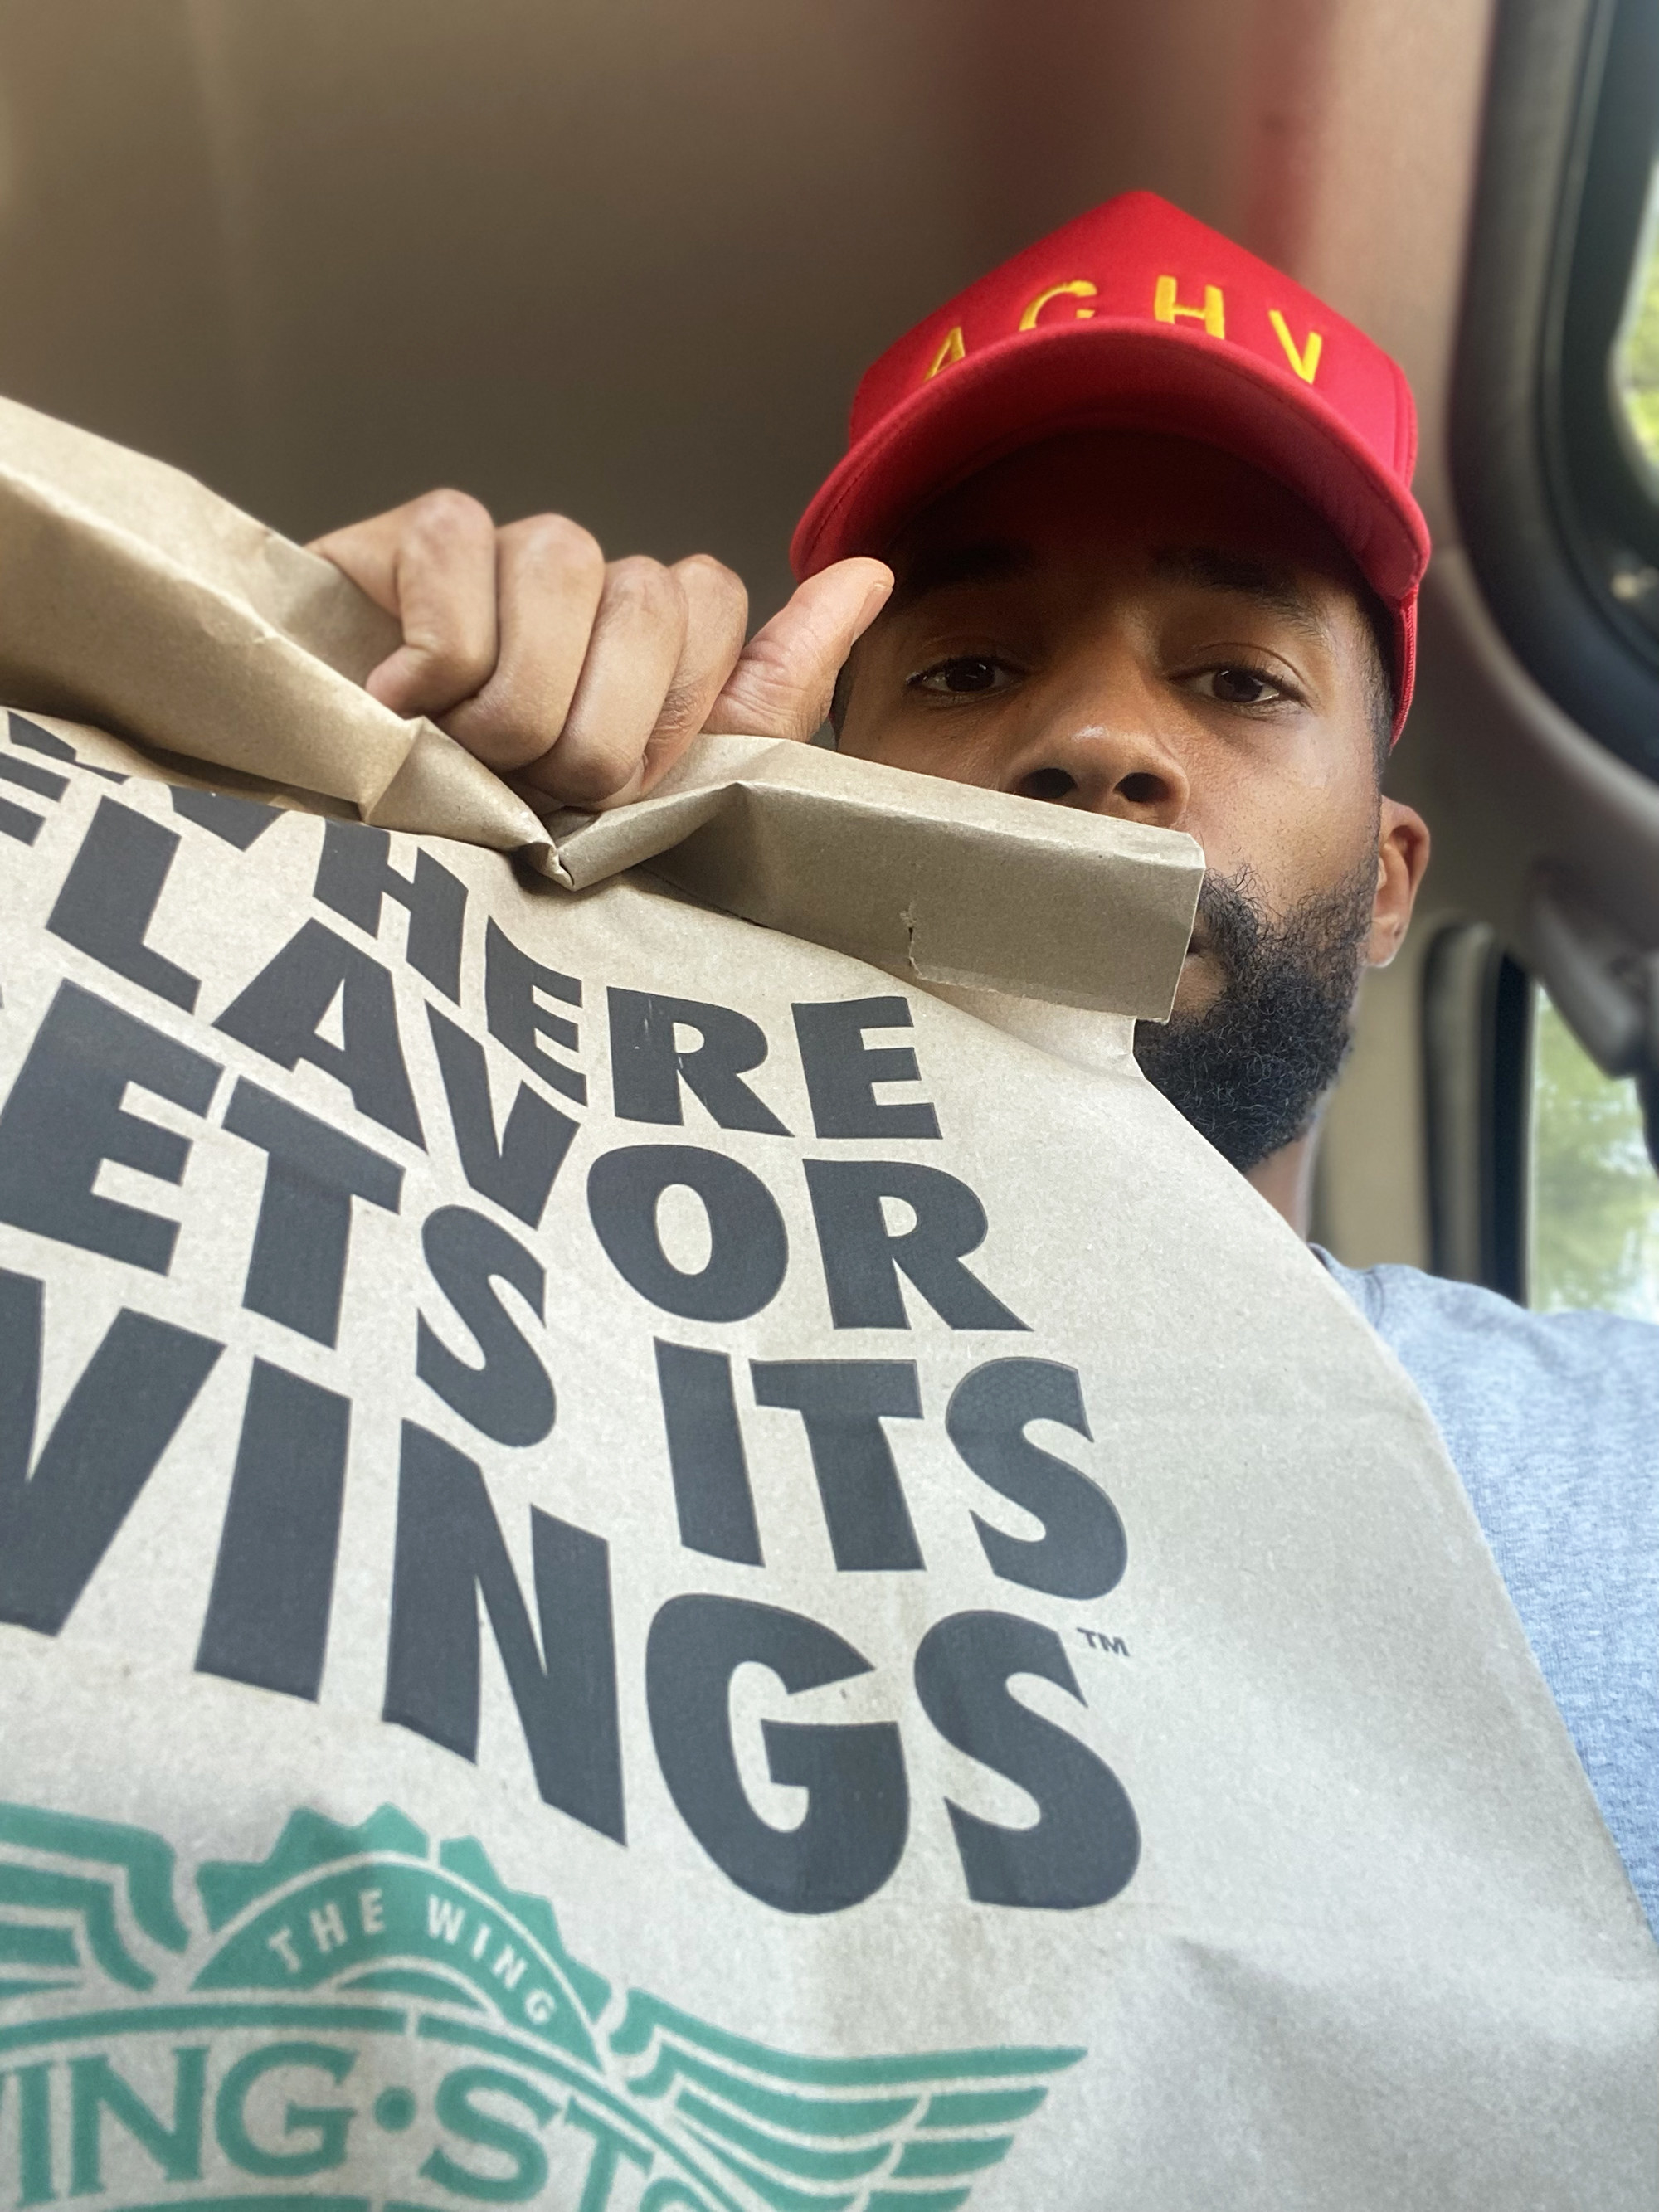 Christopher holding a Wingstop bag